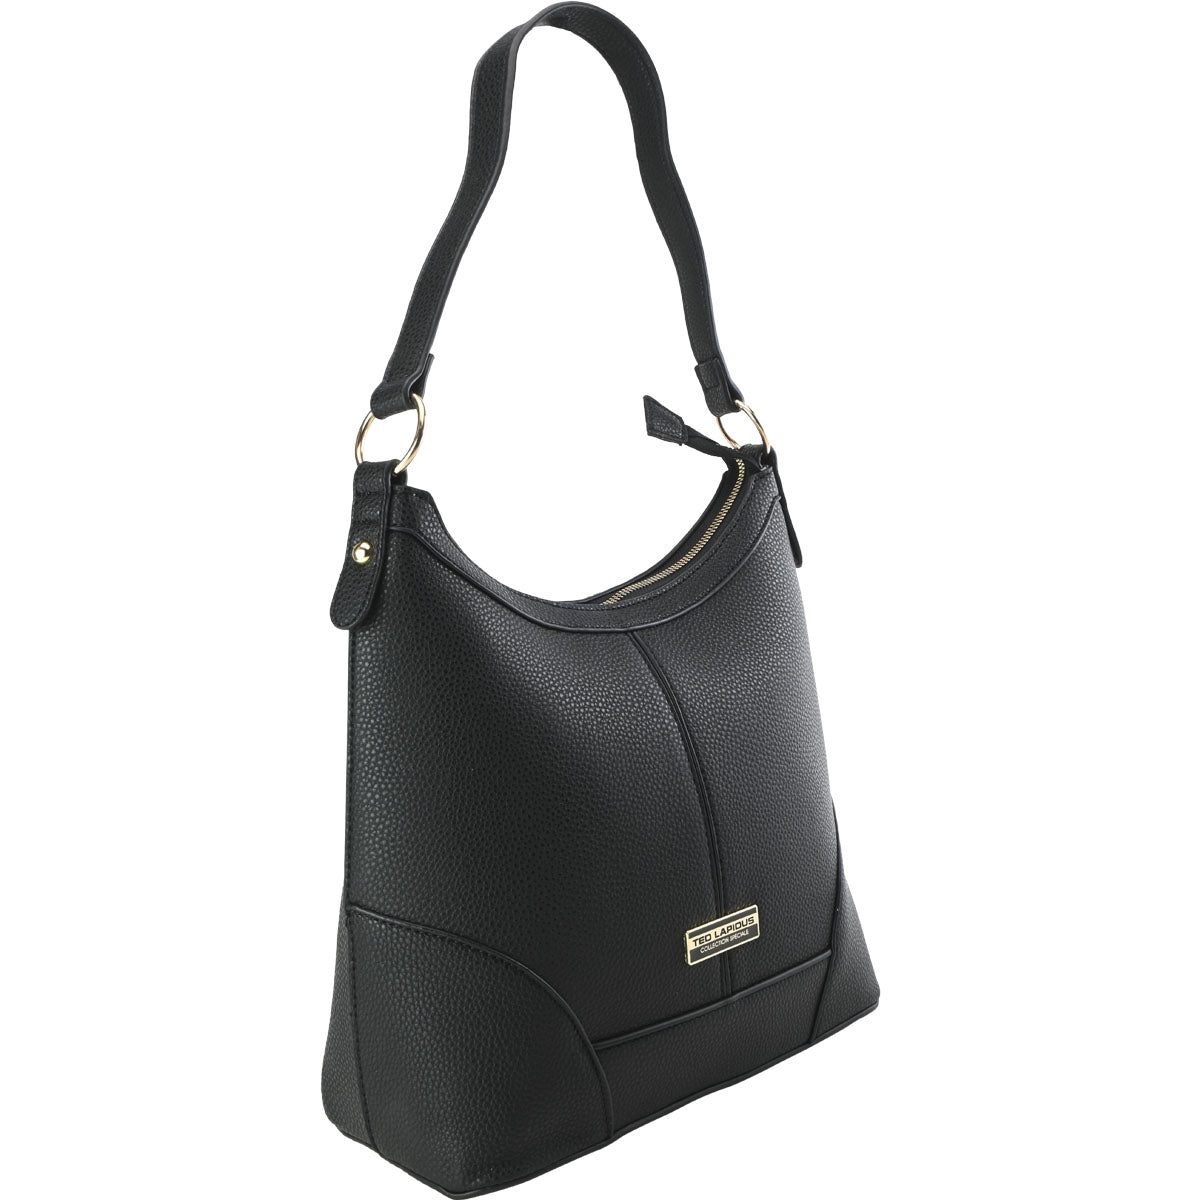 Bolso Hobo Color Negro Ted Lapidus Para Mujer